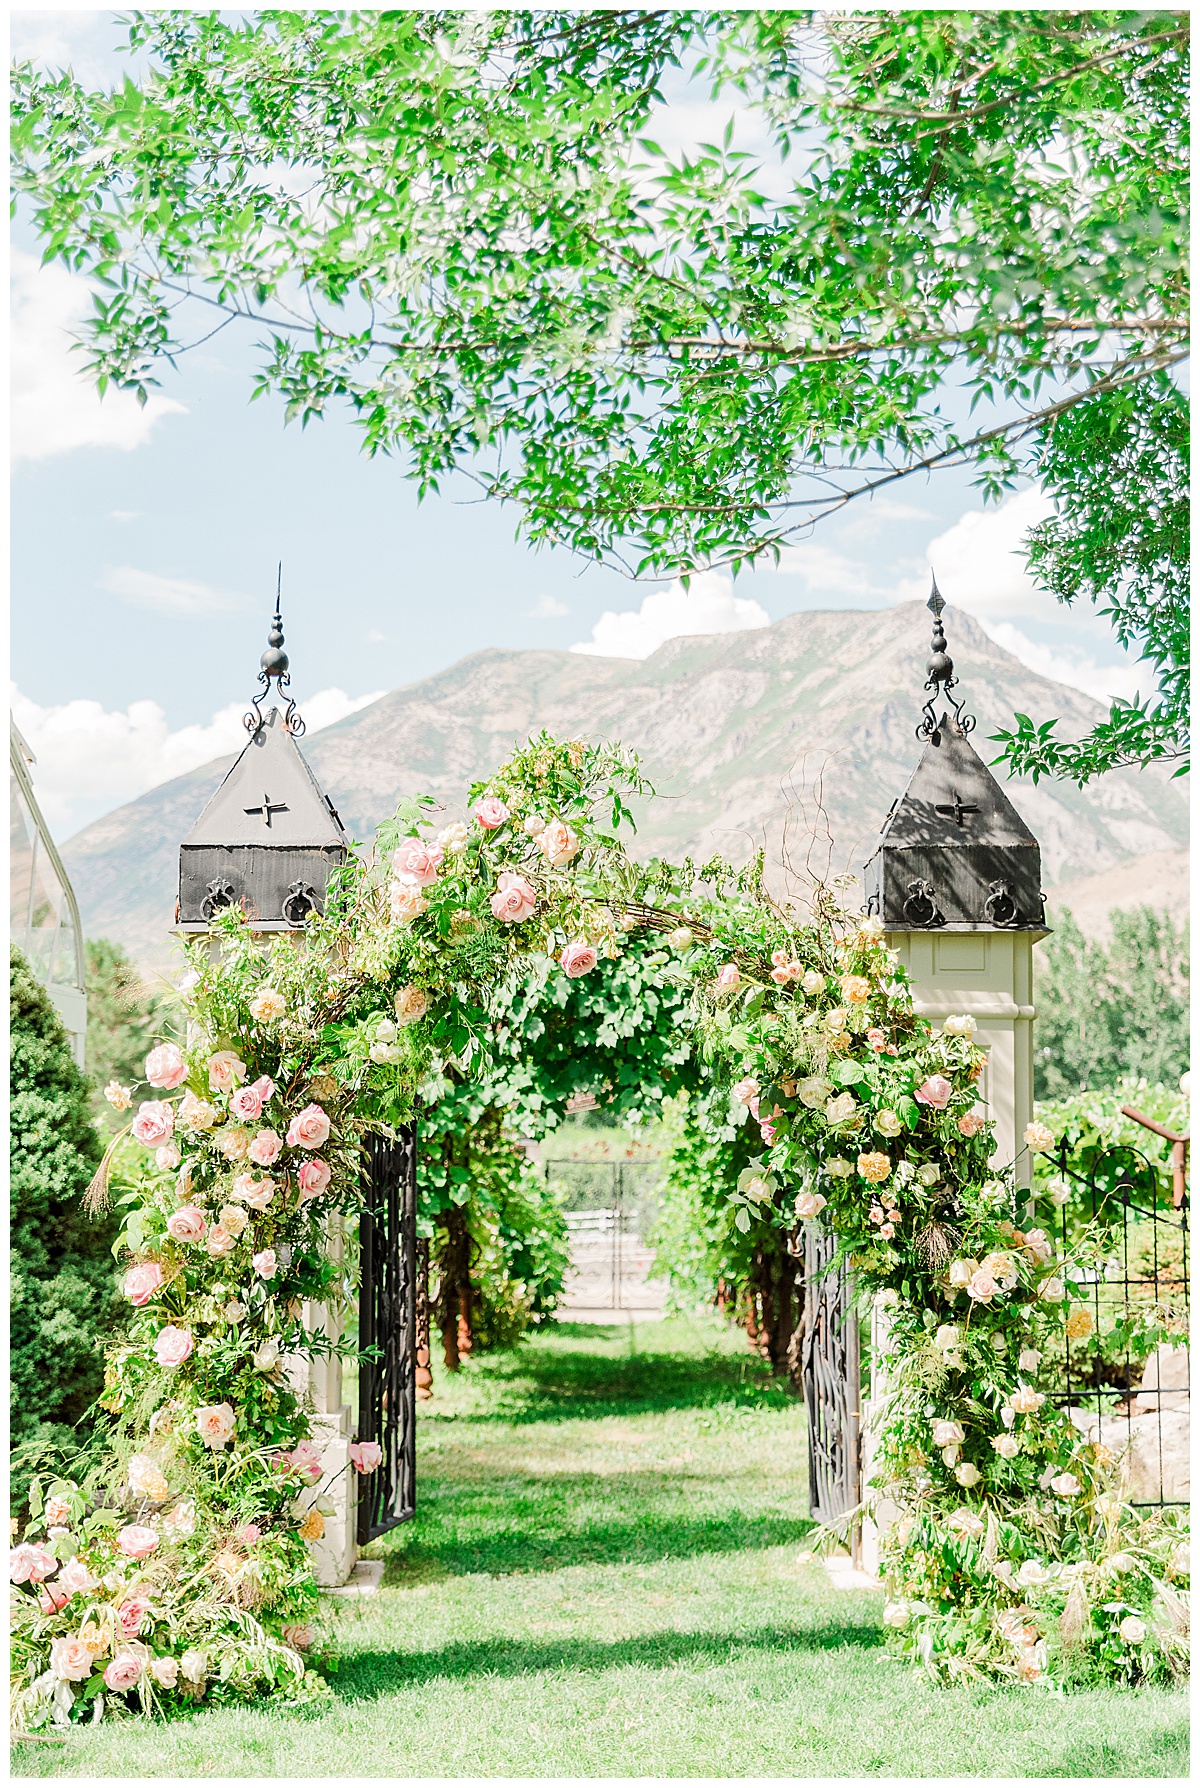 green archway with beautiful flowers